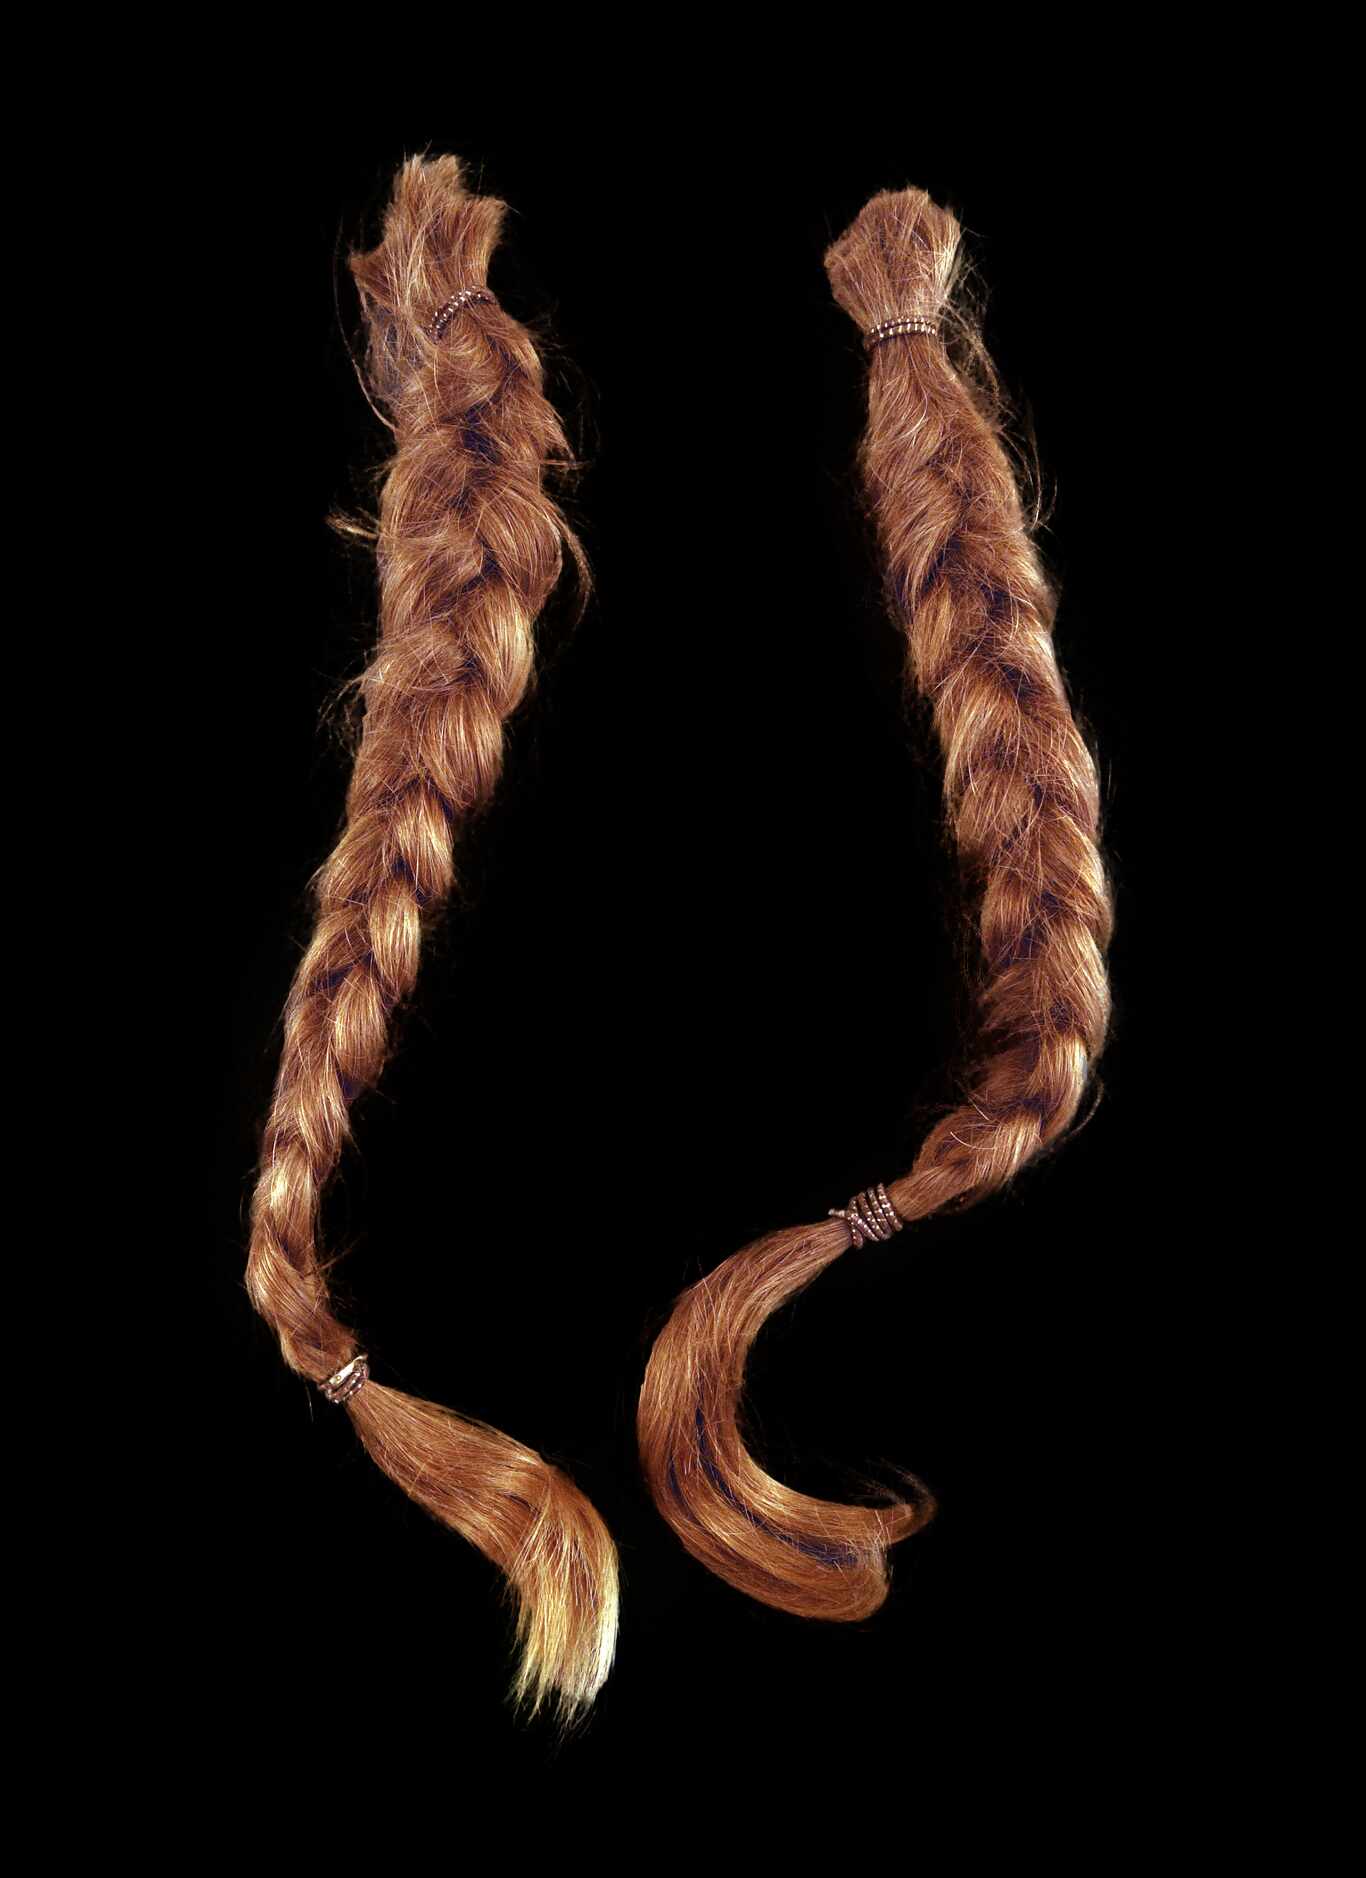 2014 - Braids of Willie Nelson's hair are displayed in a photo released by Guernsey's...